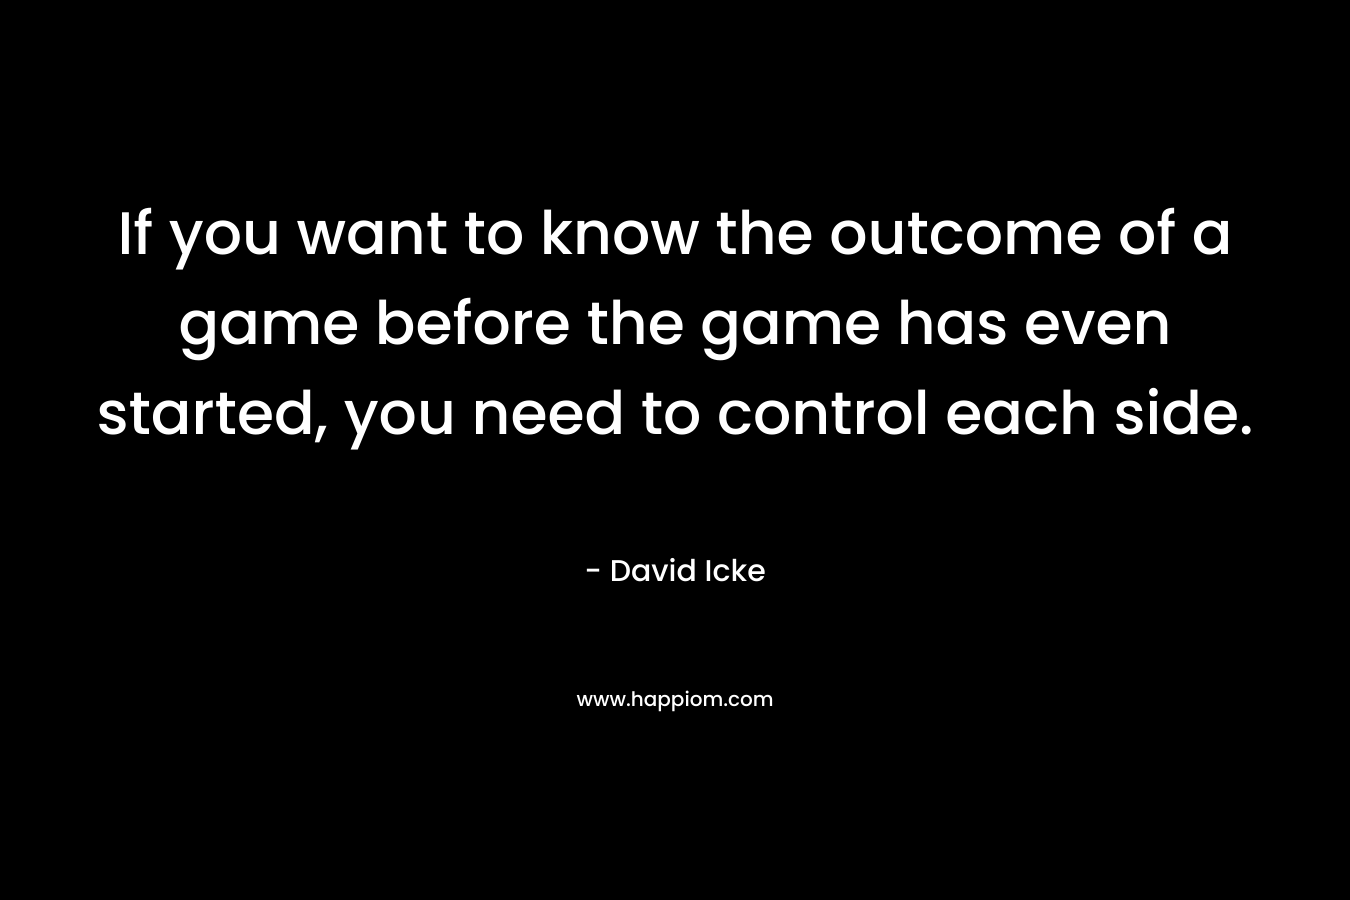 If you want to know the outcome of a game before the game has even started, you need to control each side. – David Icke